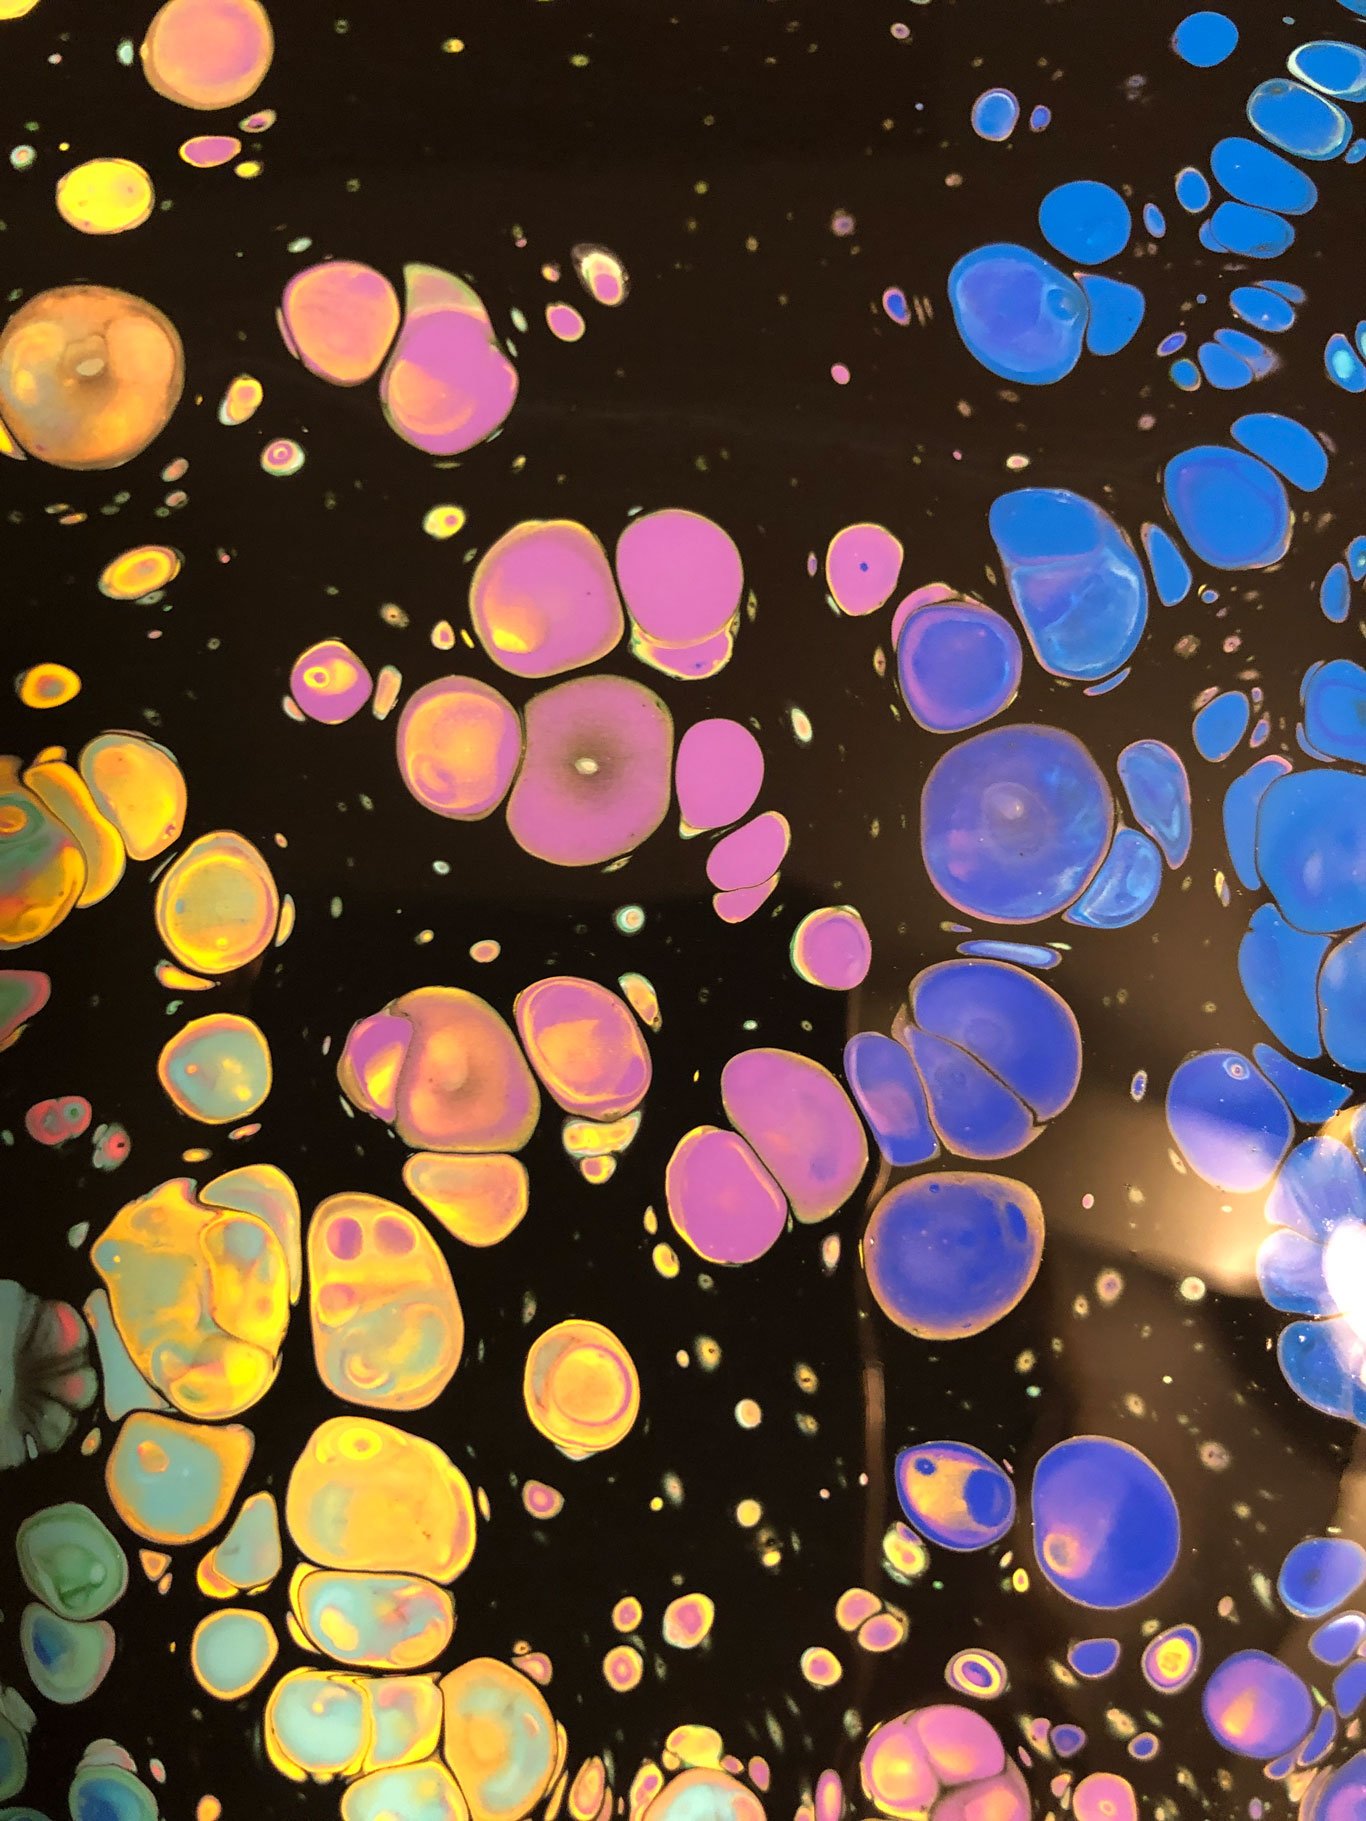 Types of Additives Used to Make Cells in Acrylic Pouring 